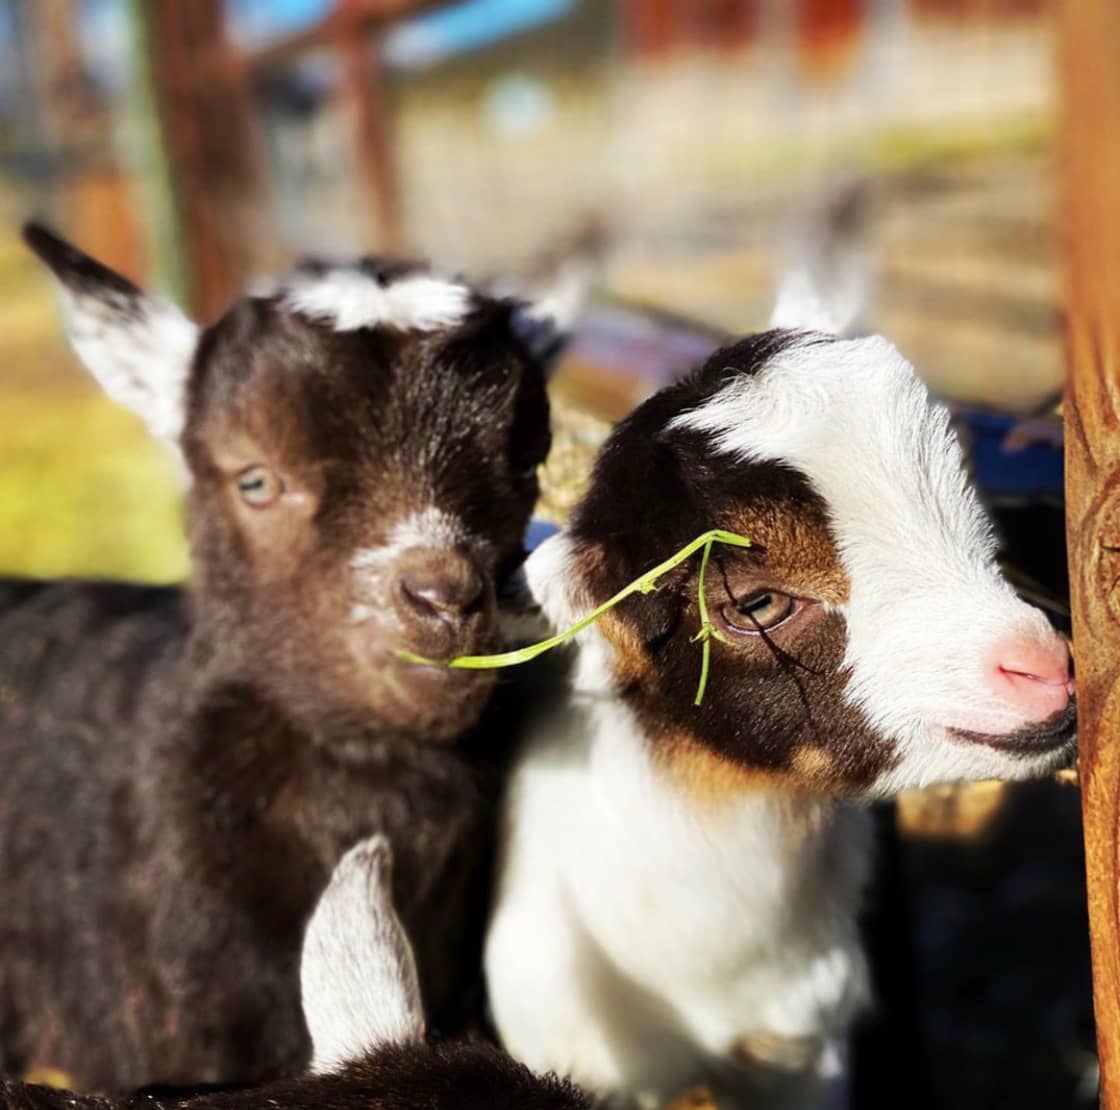 Baby goats 